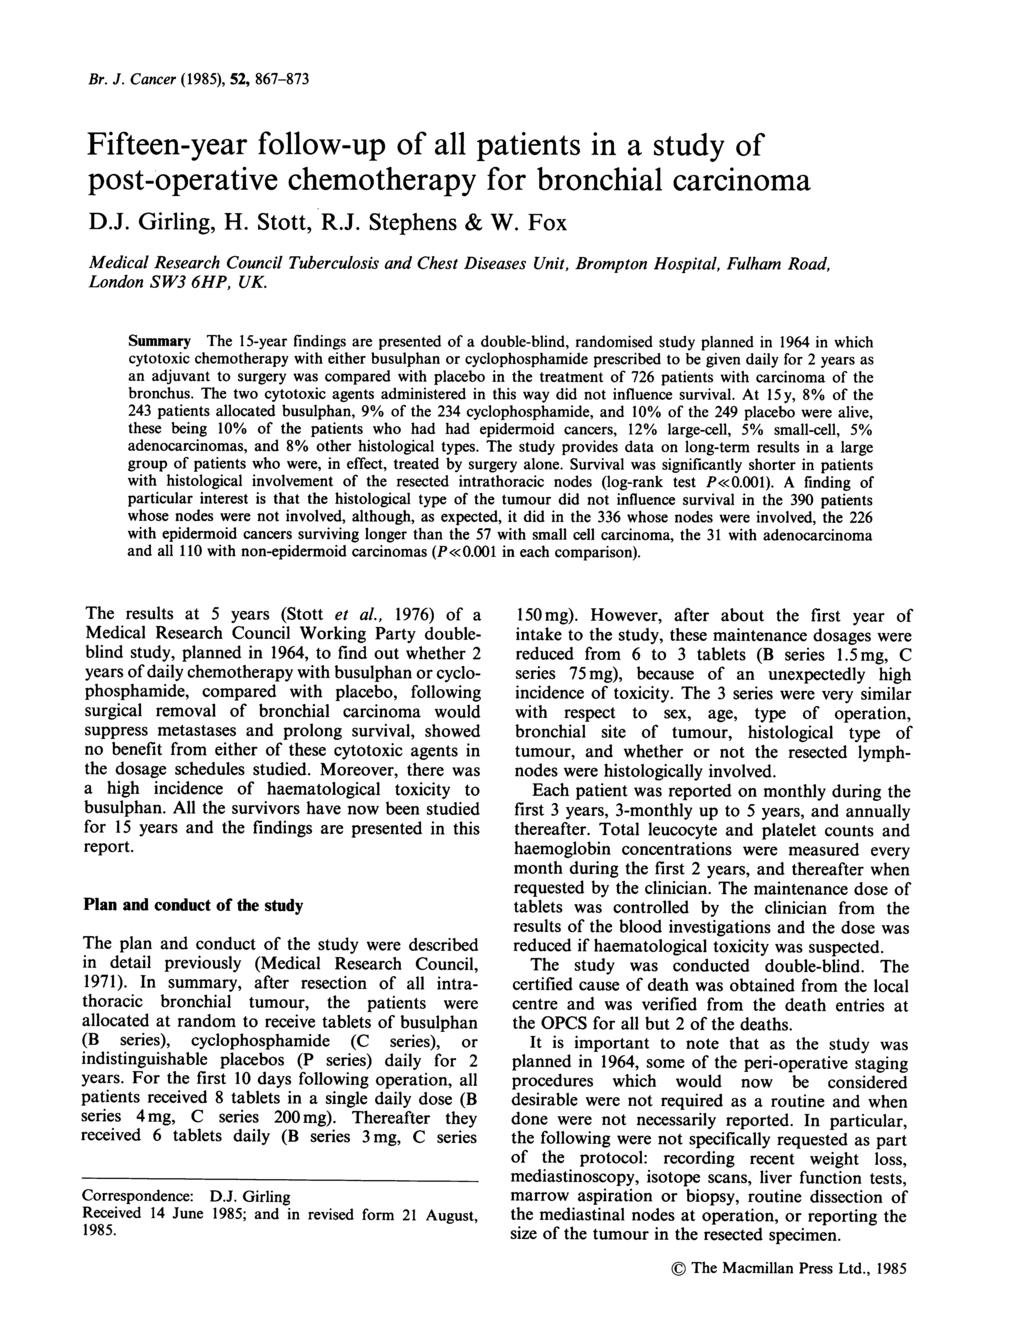 Br. J. Cancer (1985), 52, 867-873 Fifteen-year follow-up of all patients in a study of post-operative chemotherapy for bronchial carcinoma D.J. Girling, H. Stott, R.J. Stephens & W.